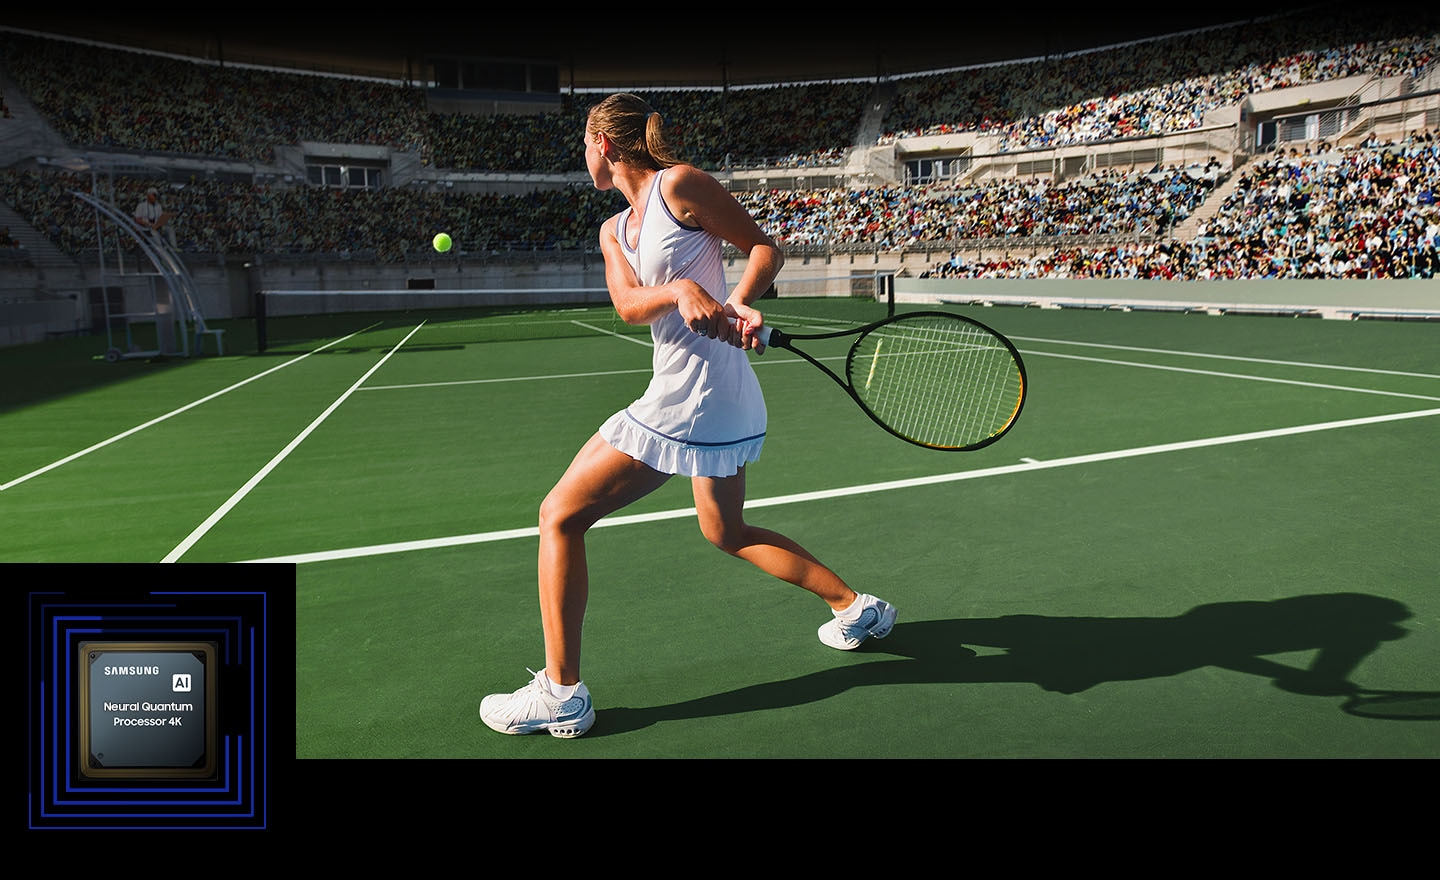 A woman is playing tennis in front of a large crowd.<br>The Neural Quantum Processor 4K processes the many objects on display and enhances the entire scene.<br>Neural Quantum Processor 4K is on display in the lower lefthand corner.